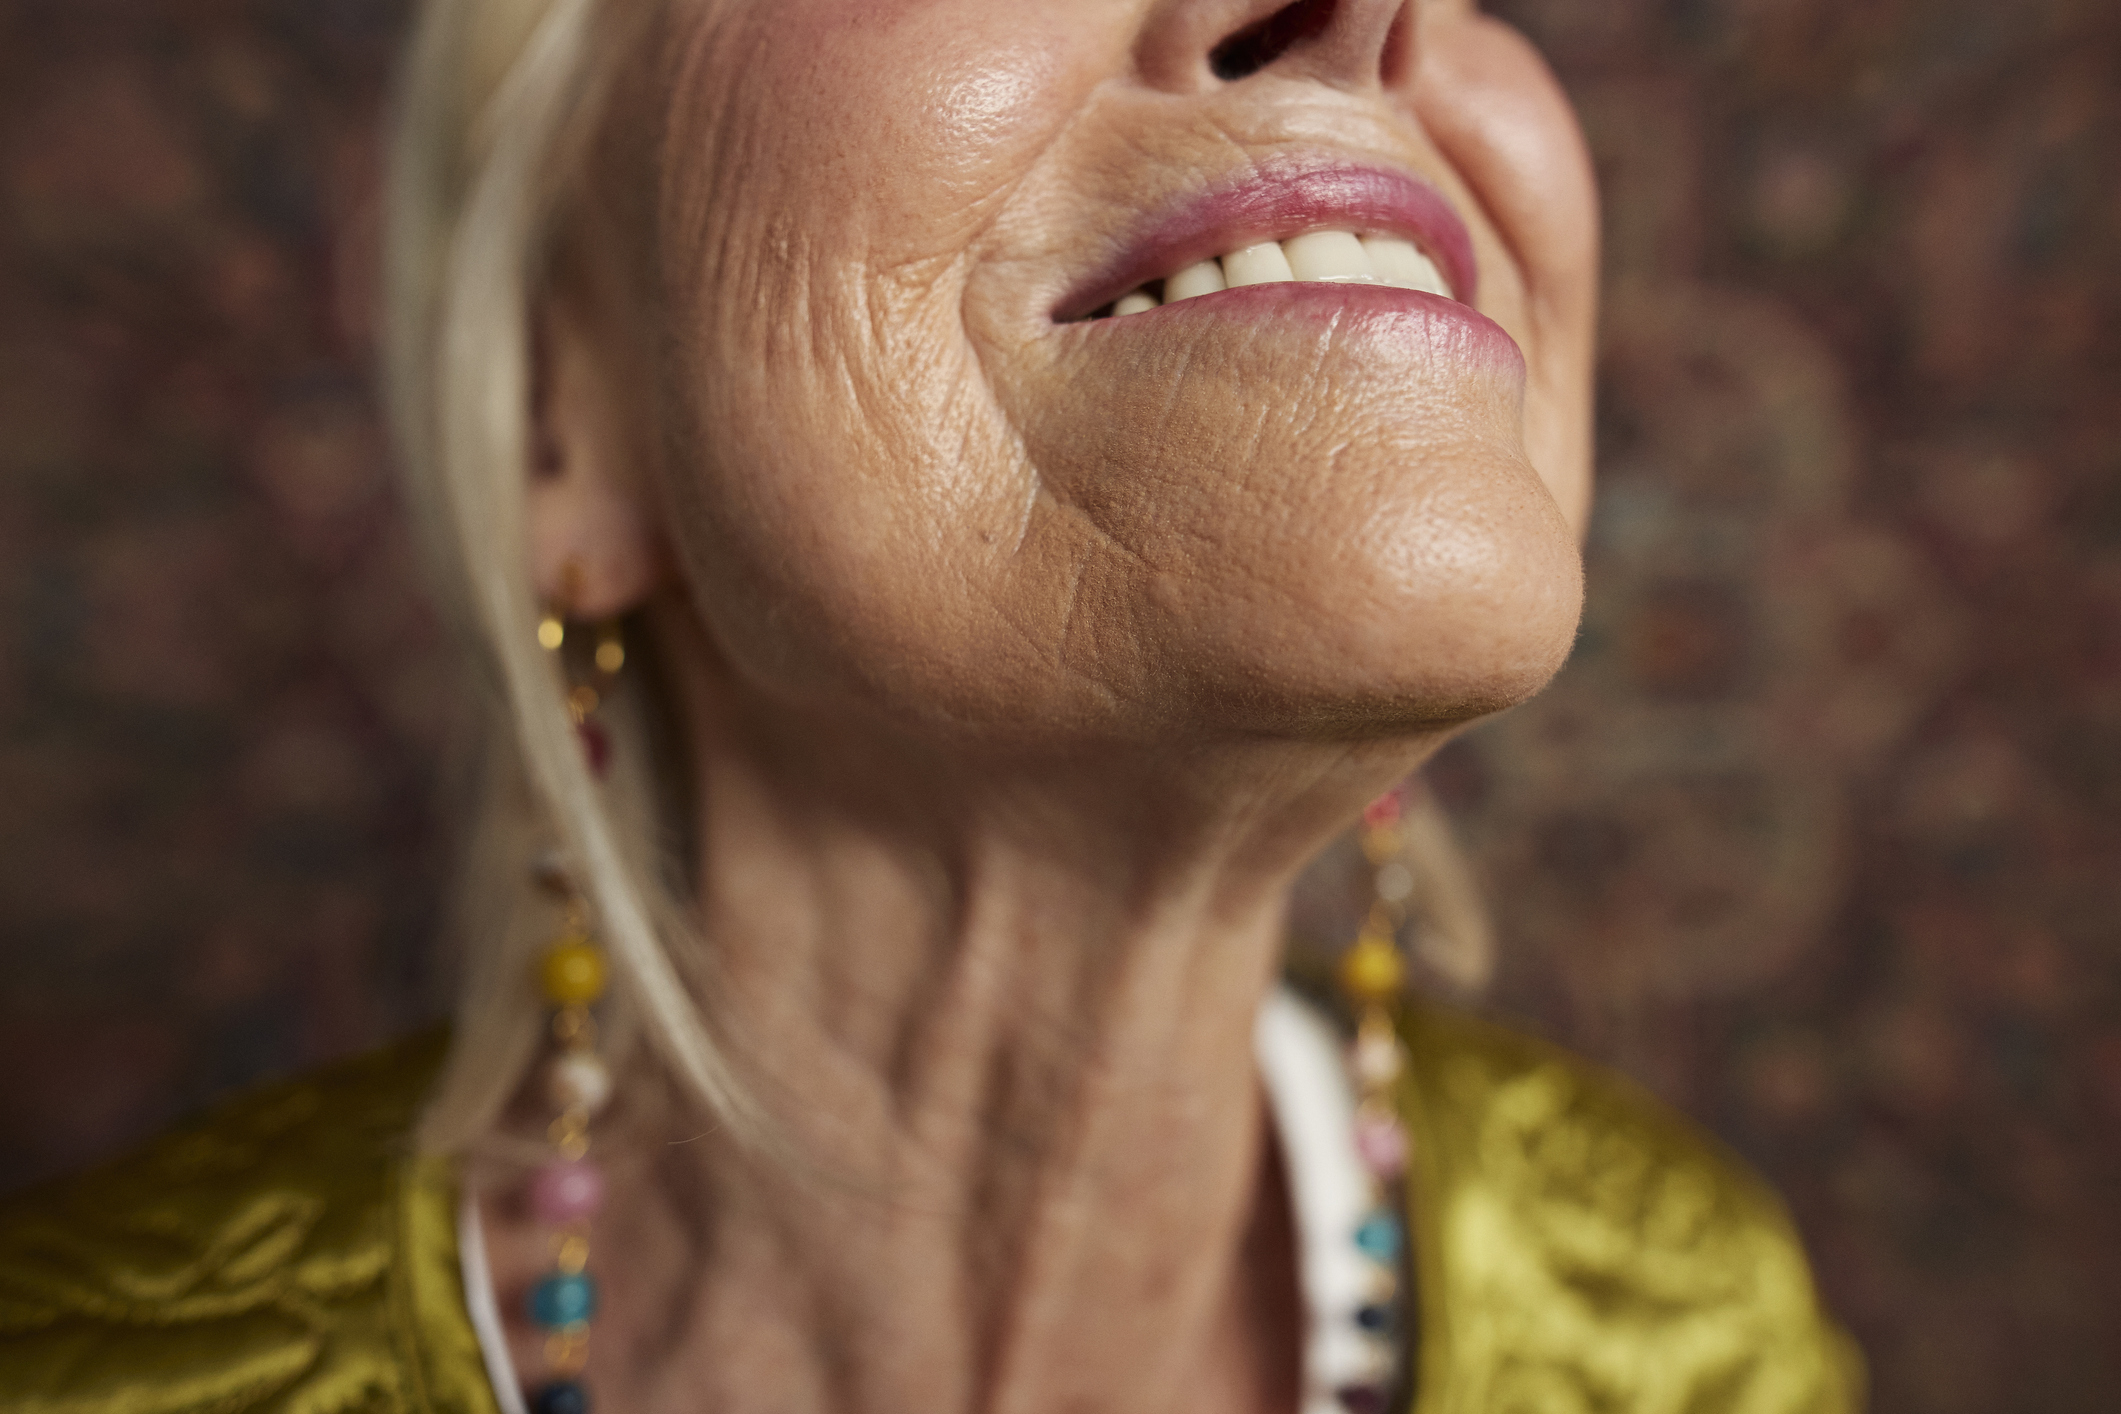 Close-up of an elderly person&#x27;s smiling face, showing earrings with colorful beads